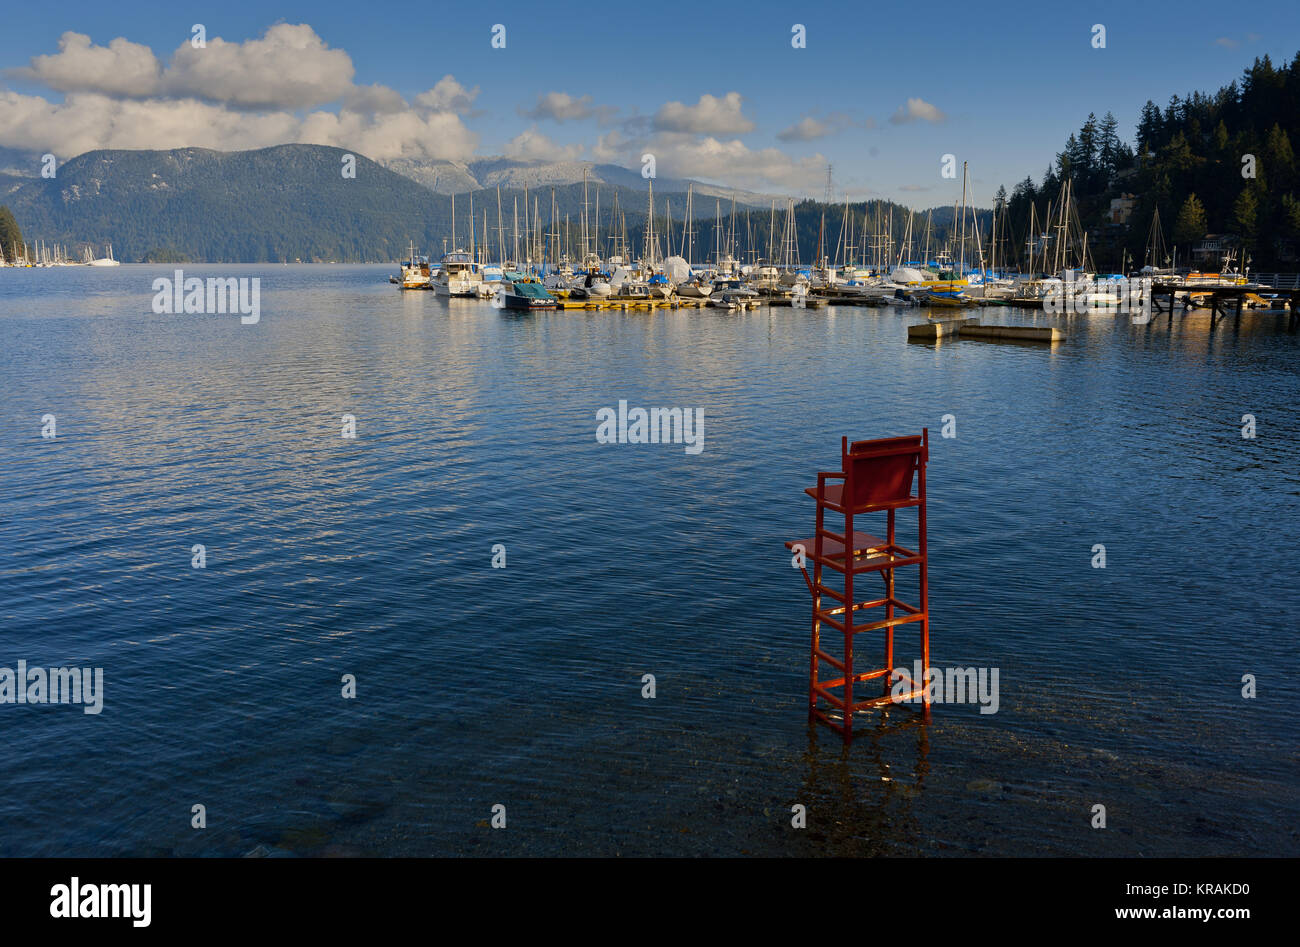 A red lifeguard chair stands in the water at Deep Cove, North Vancouver, Canada. Stock Photo